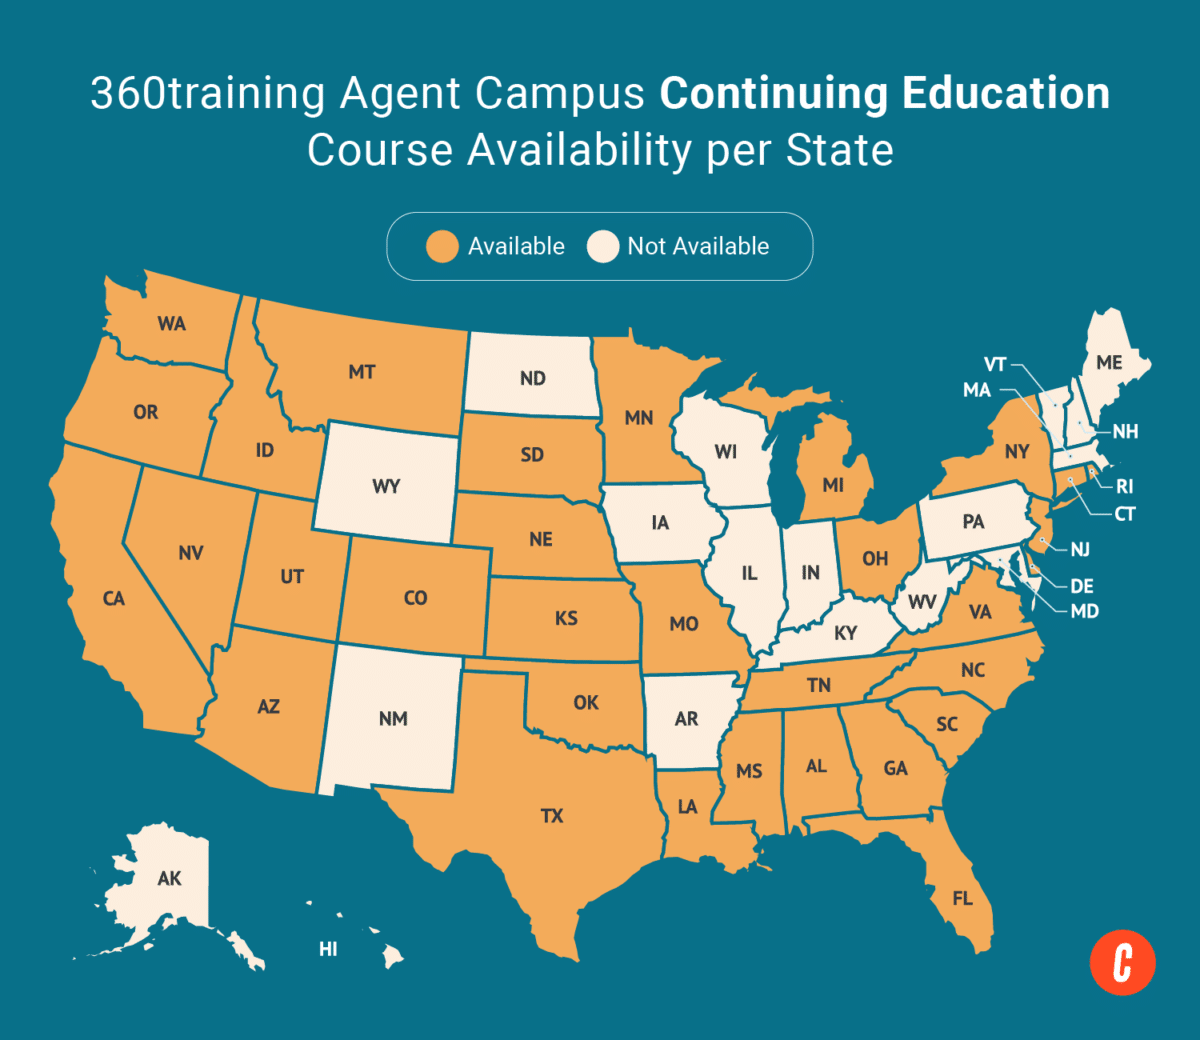 A U.S. map with states where 360training's available continuing education courses are shaded